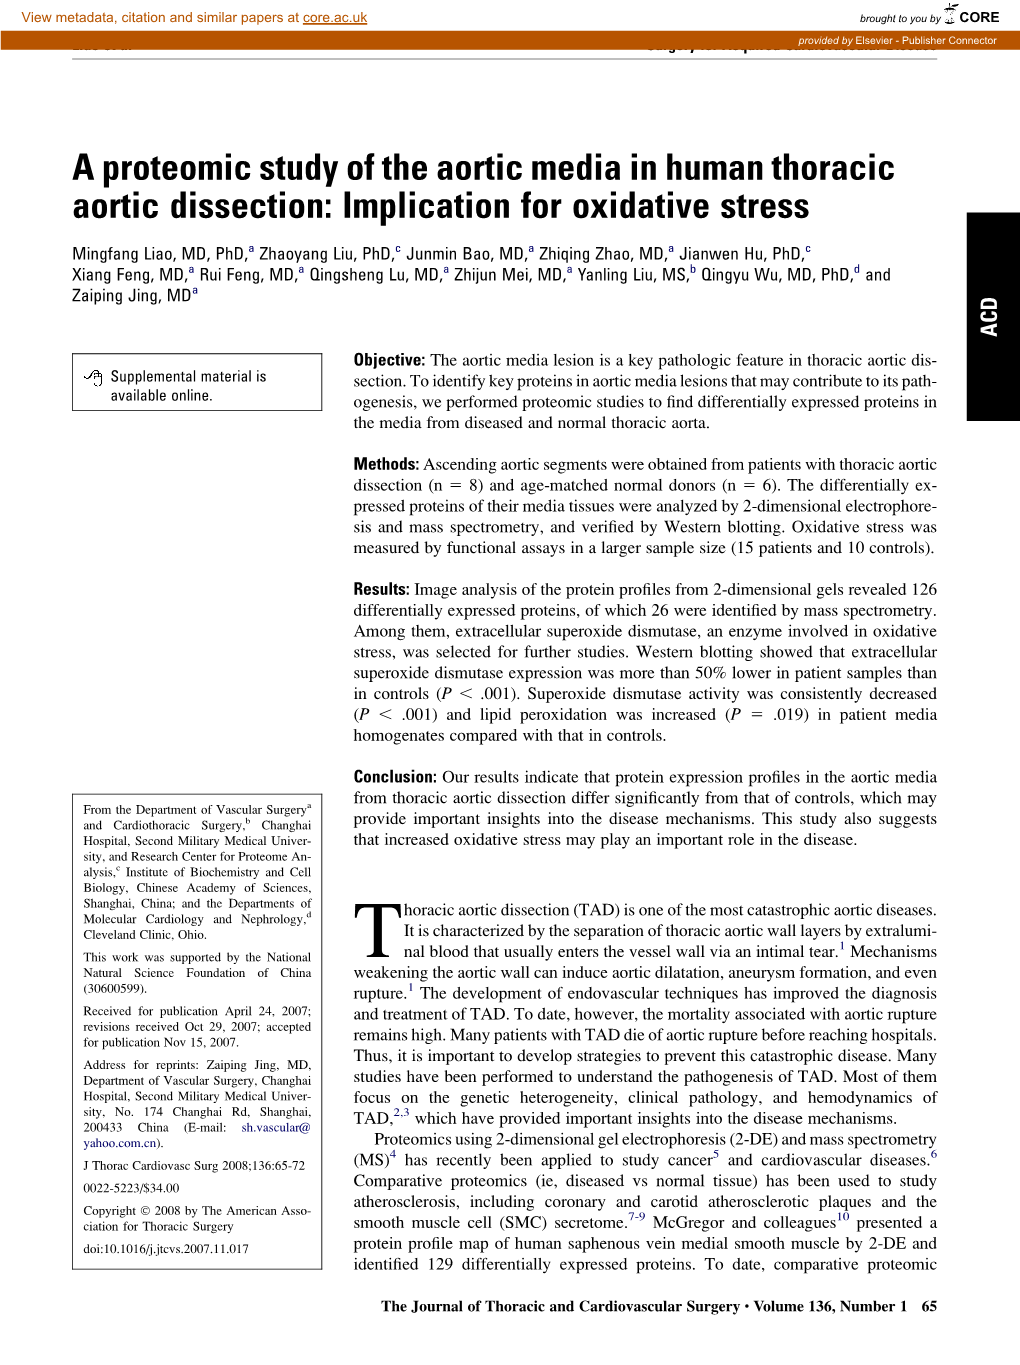 A Proteomic Study of the Aortic Media in Human Thoracic Aortic Dissection: Implication for Oxidative Stress